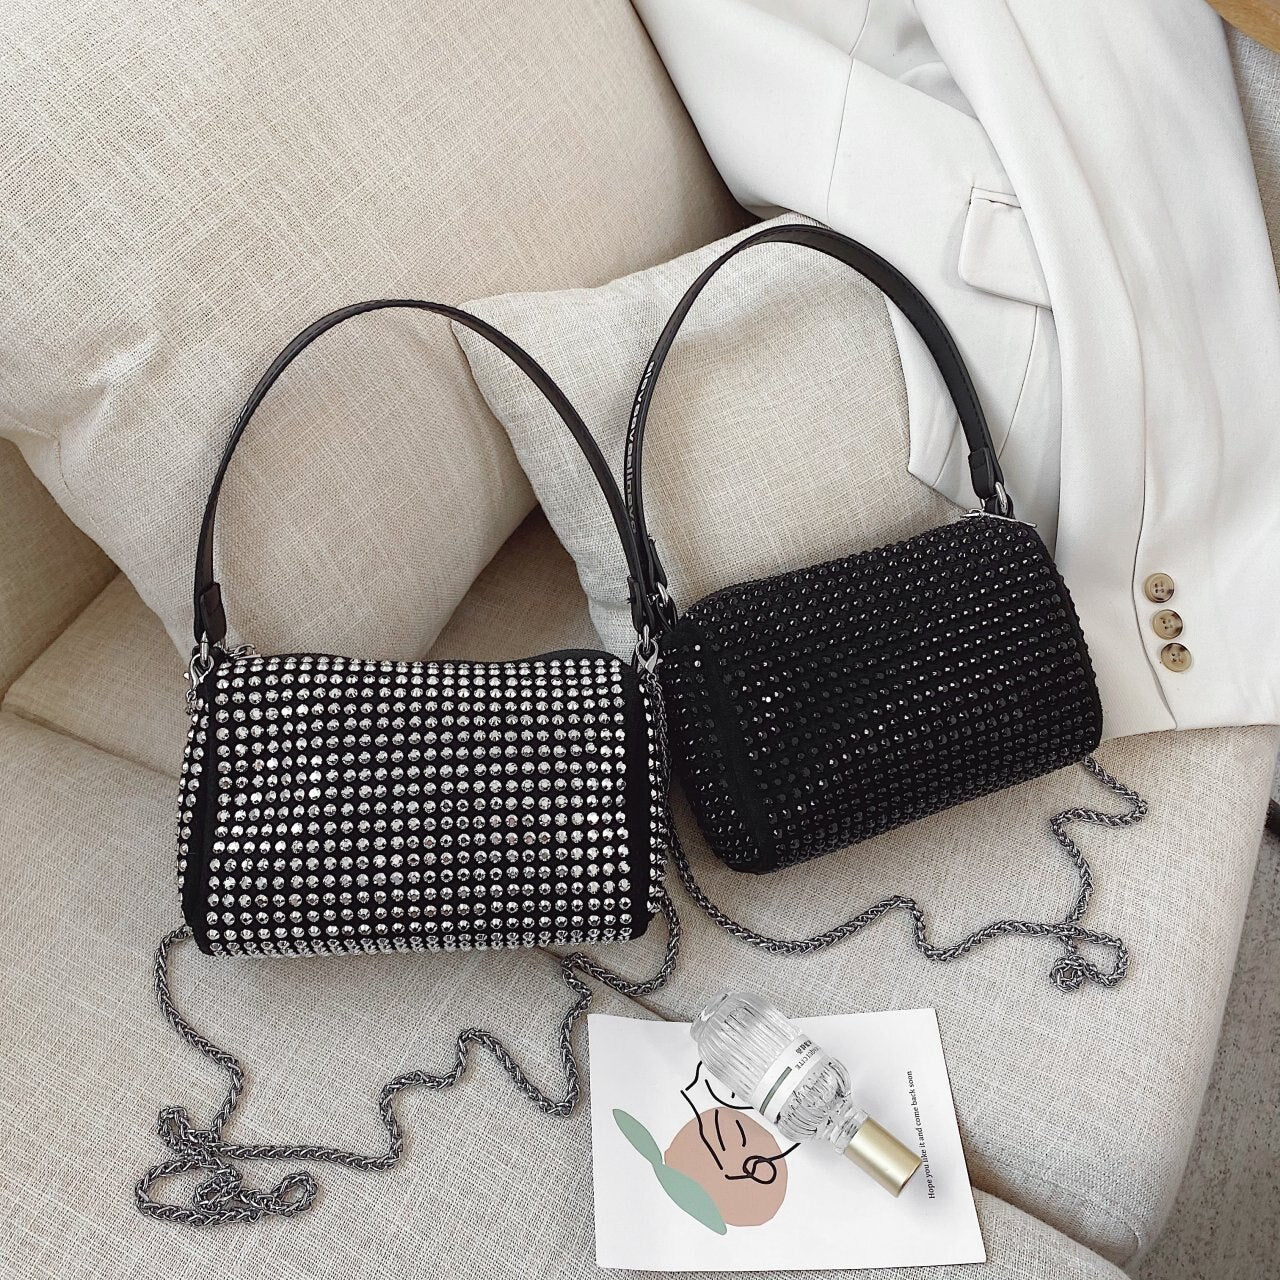 2005 High Quality Rhinestone Canvas Hobo Bag, Diamond Studded Nylon  Shoulder Tote With Chain, Ruched Designer Purse For Women From  Moonholder03, $33.58 | DHgate.Com